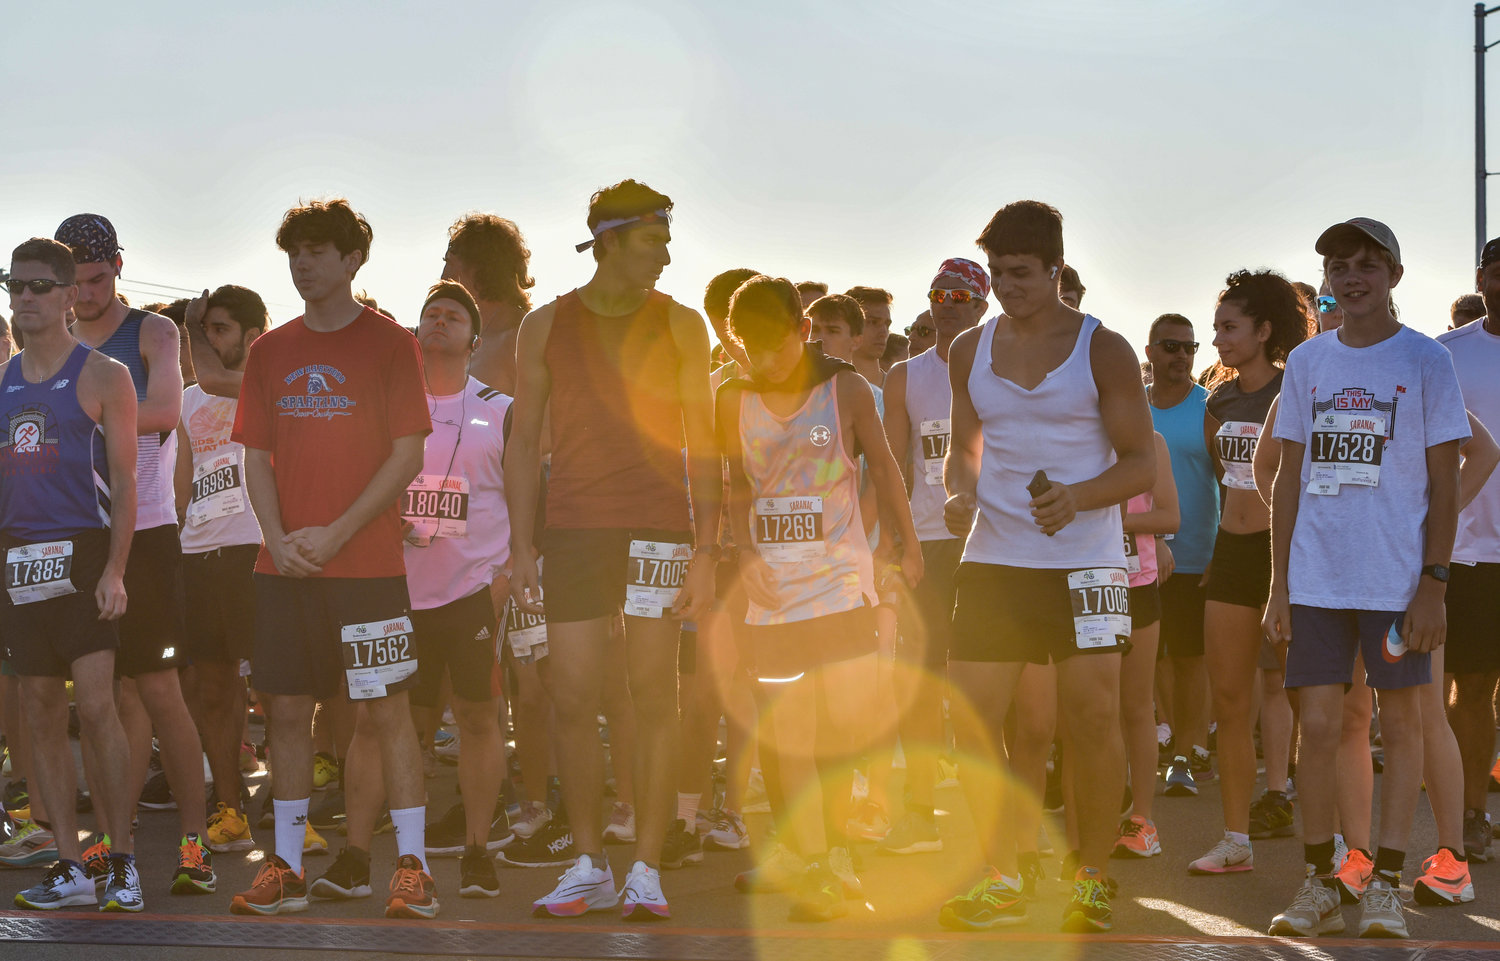 The weather was perfect the morning of the 2022 Boilermaker 5K — not too hot, not too cold, and some sunshine to guide the way.